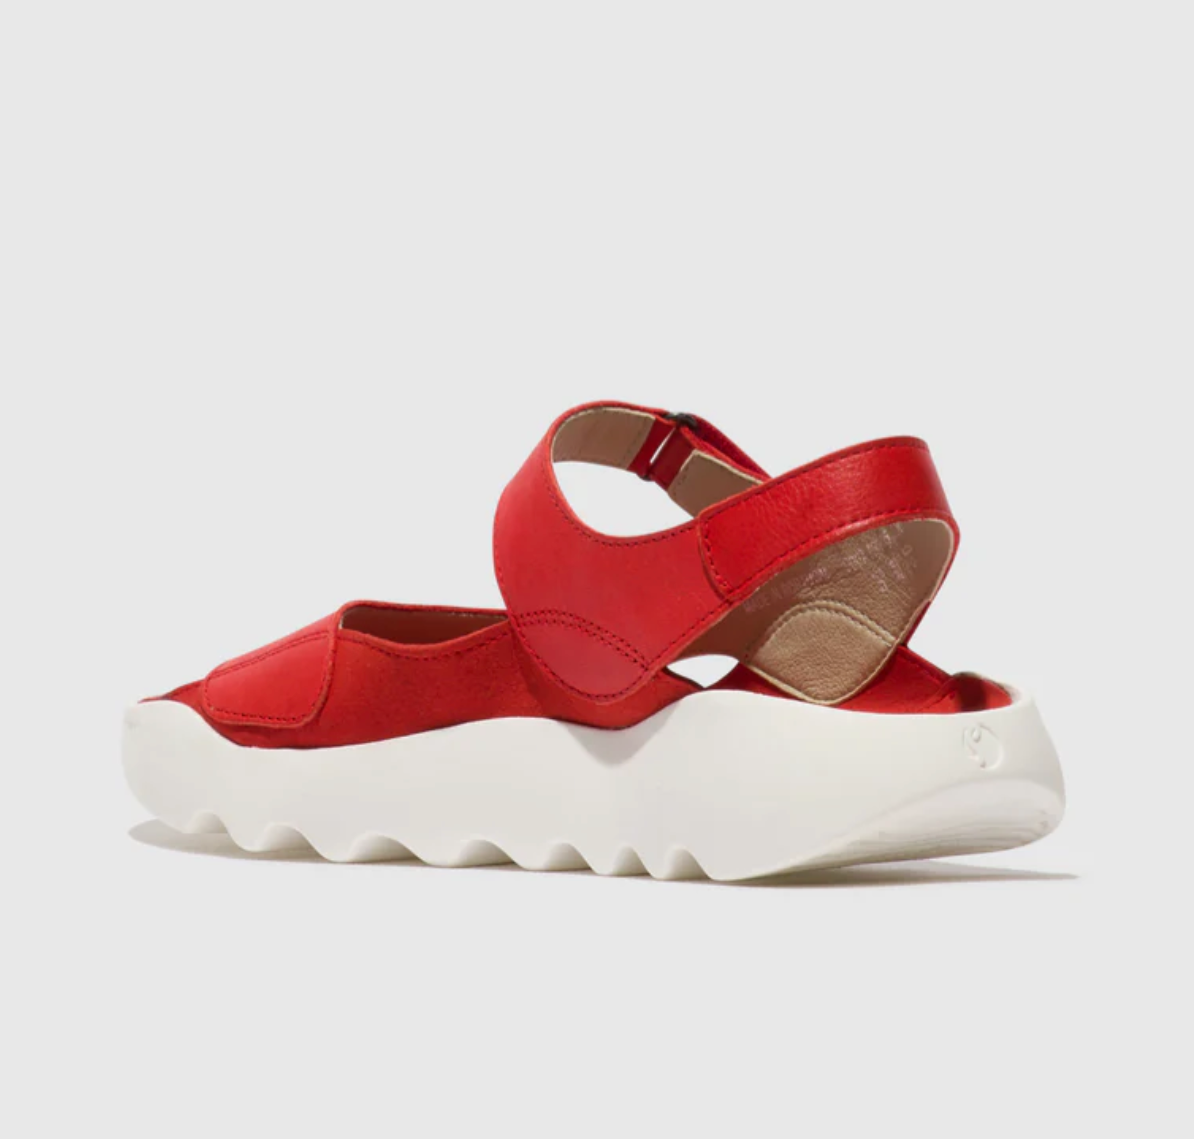 Softinos "Weal" Cherry Red - Leather Sandal